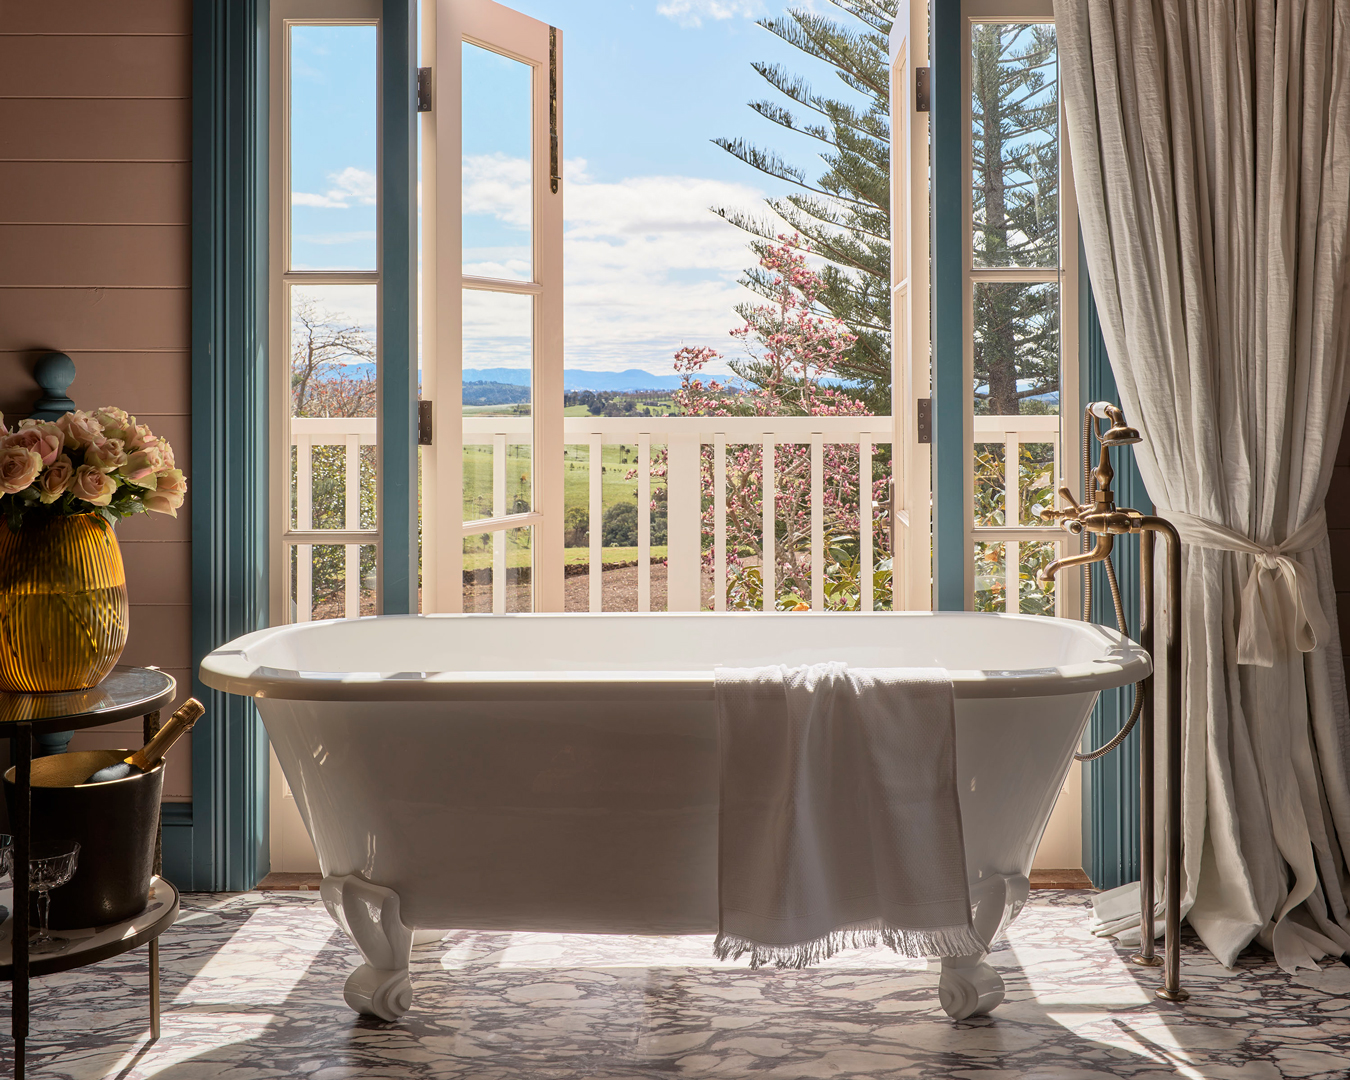 A large tub with a view at Greyleigh, one of the best hotels in NSW